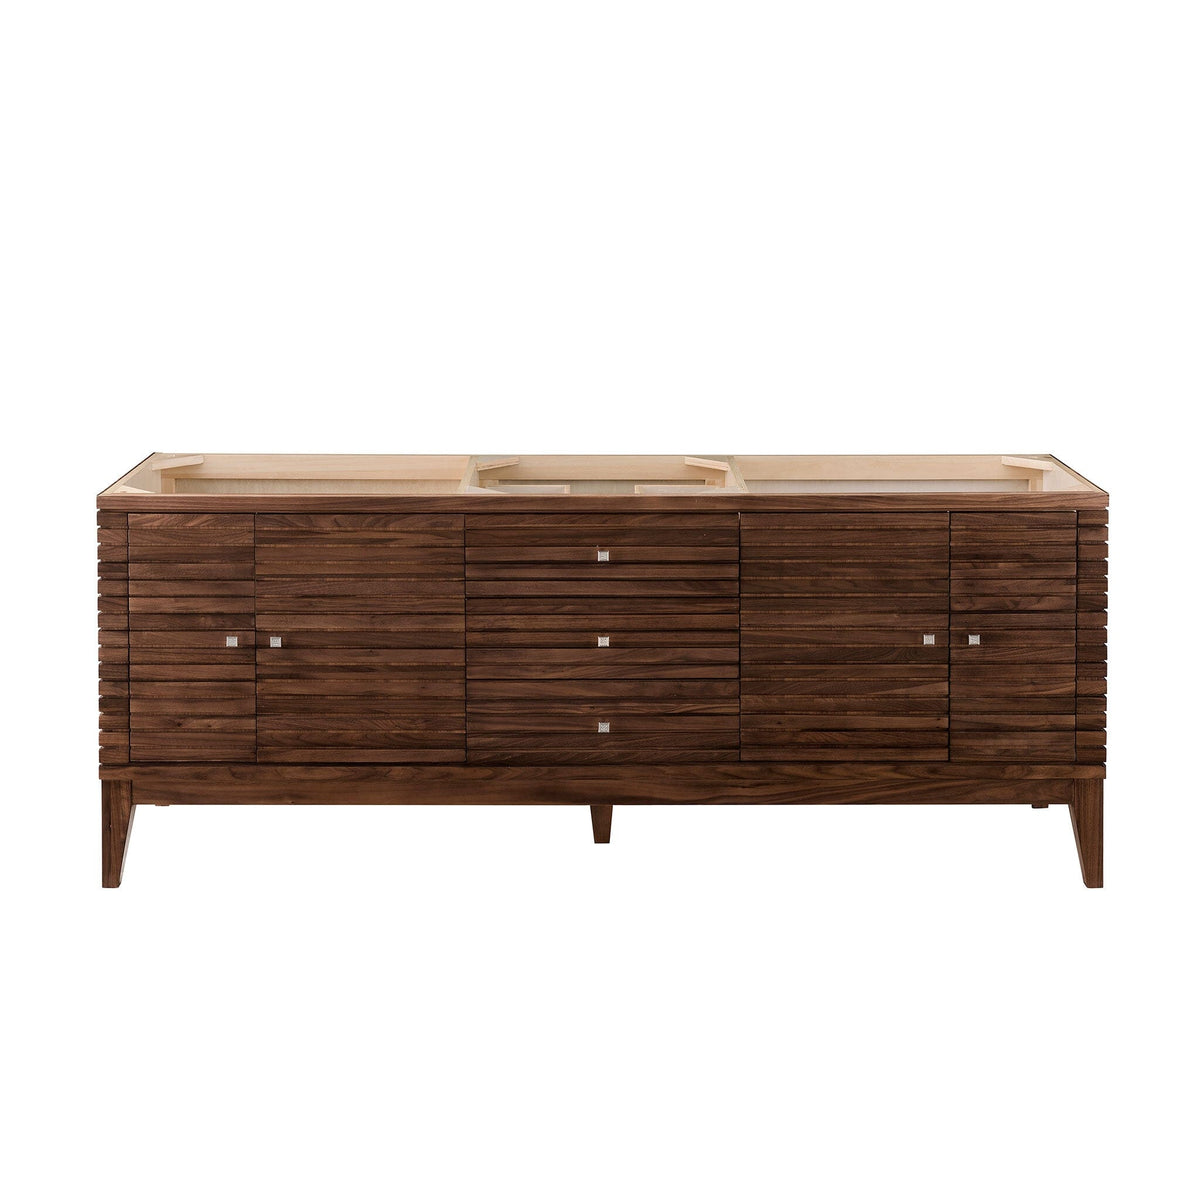 72" Linear Double Bathroom Vanity, Mid-Century Walnut with Glossy White Composite Top